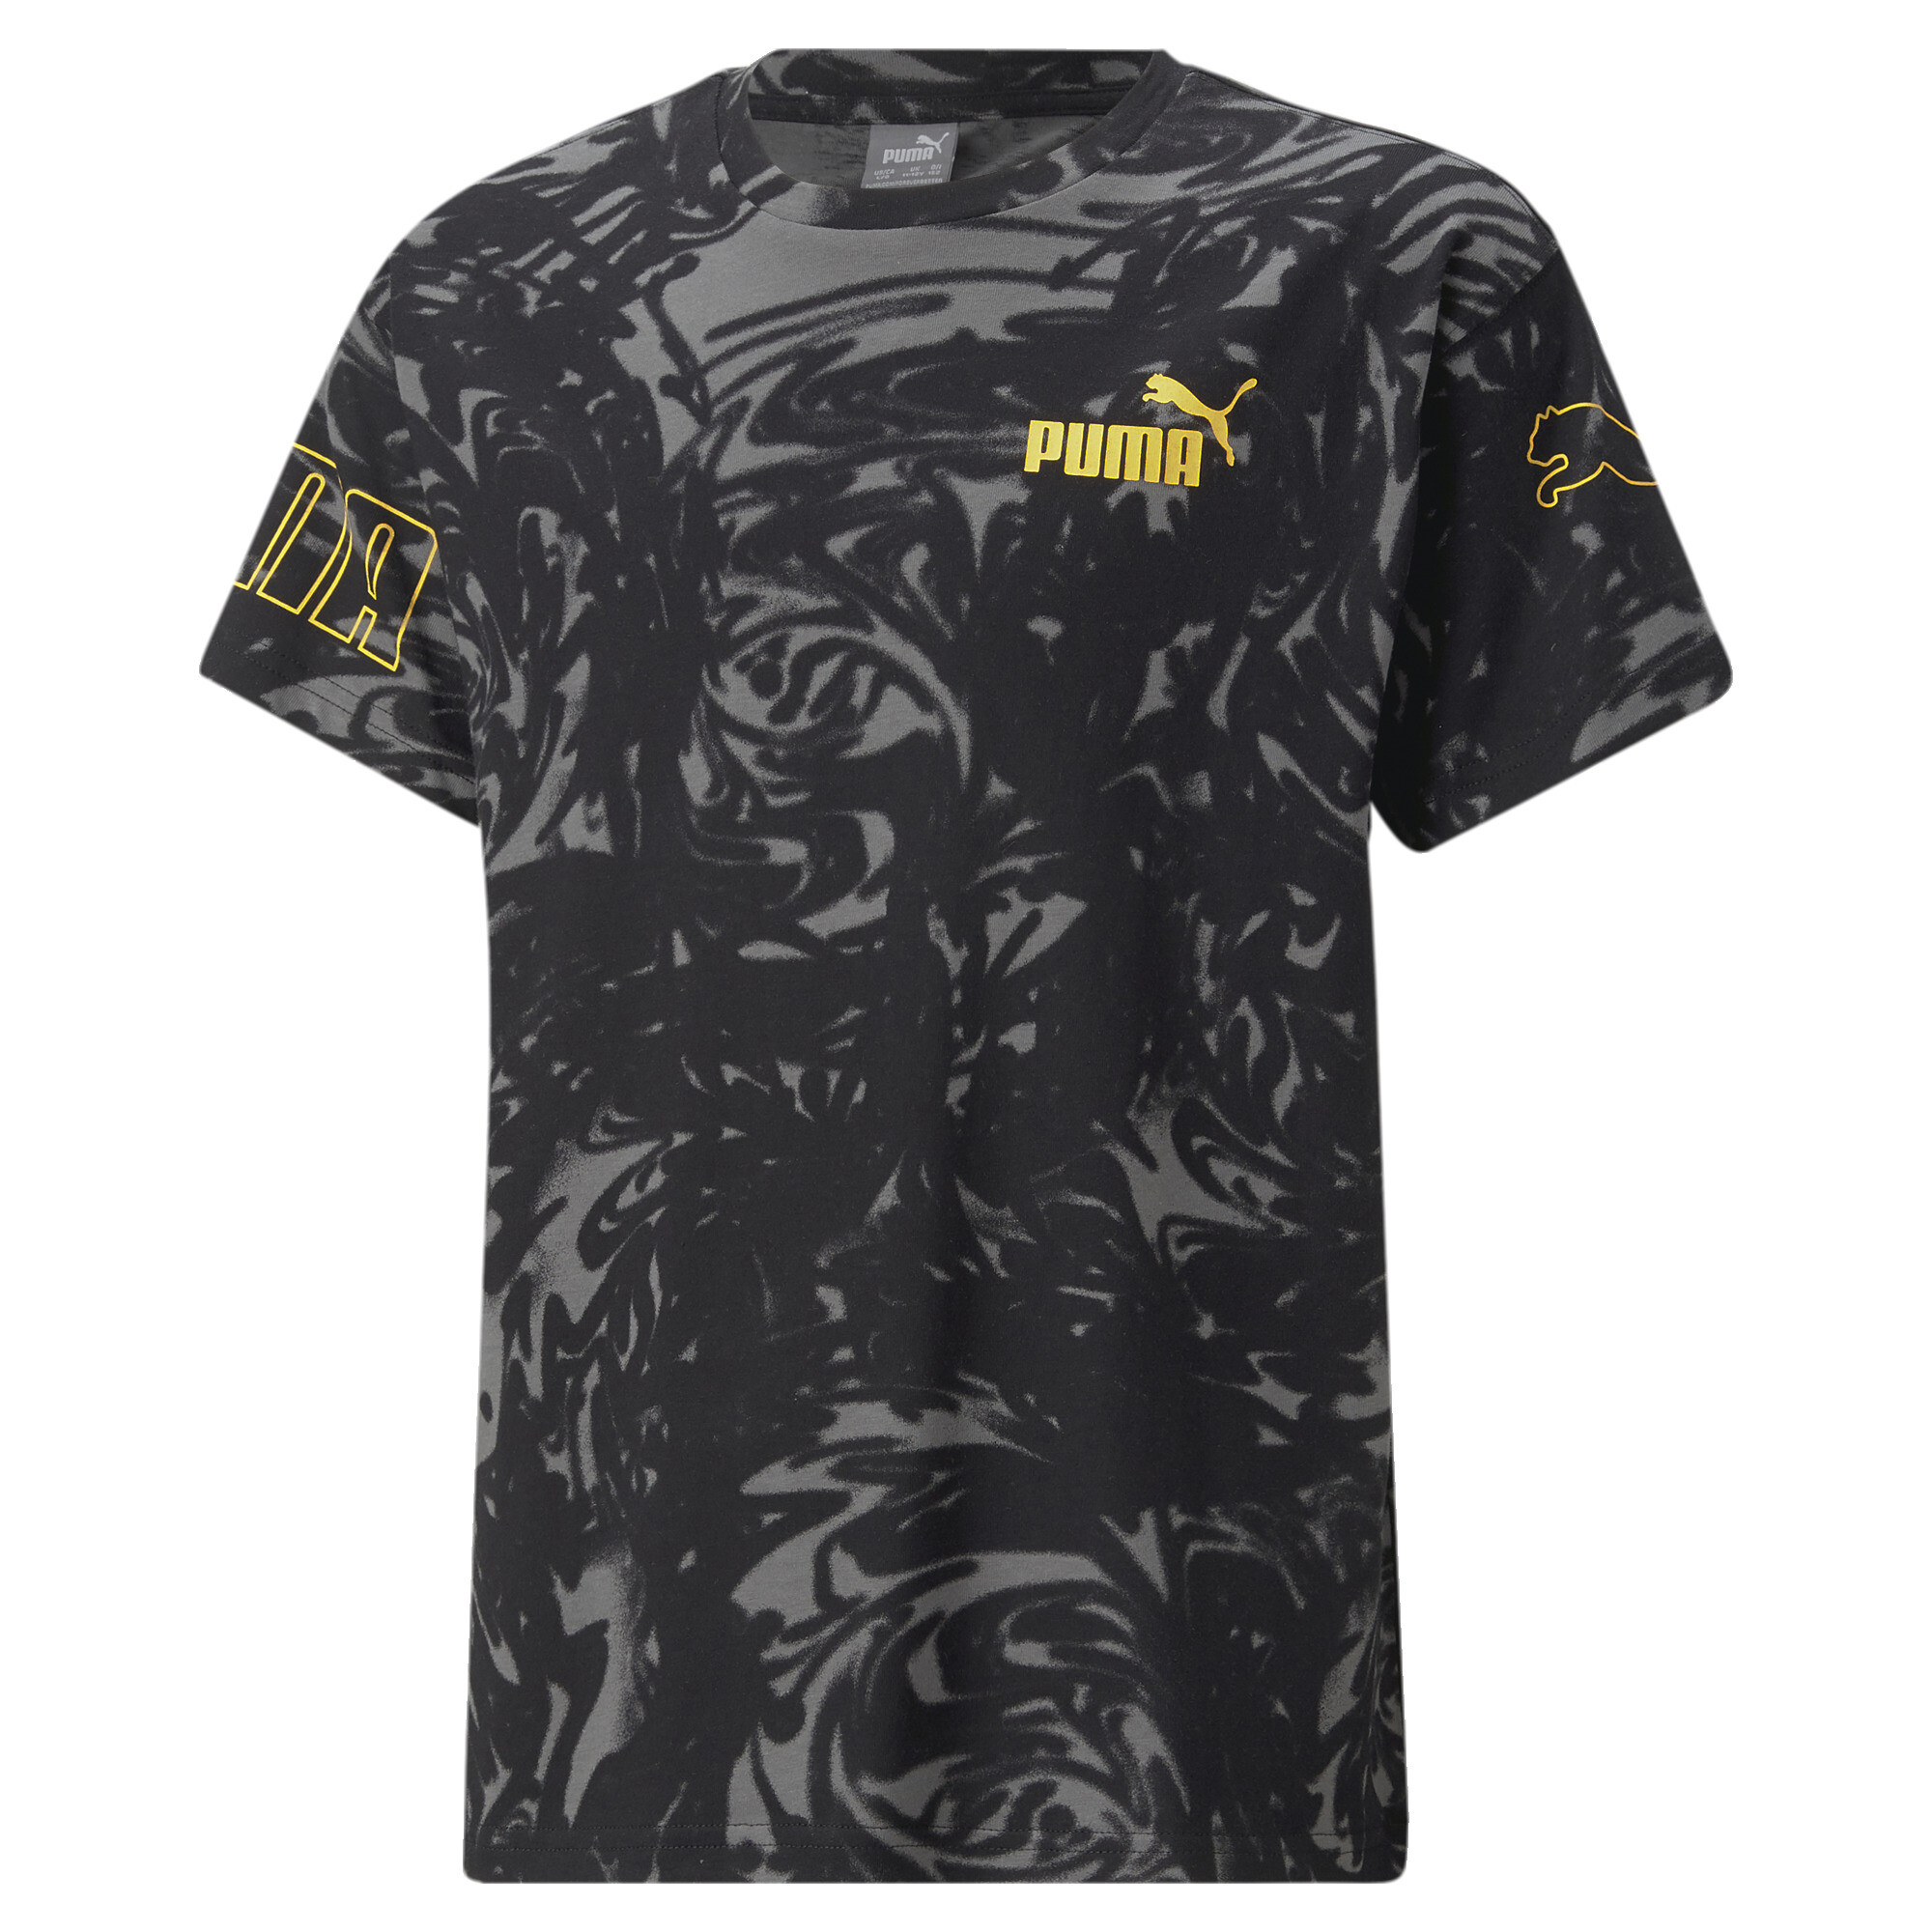 PUMA POWER SUMMER Printed T-Shirt In Black, Size 4-5 Youth